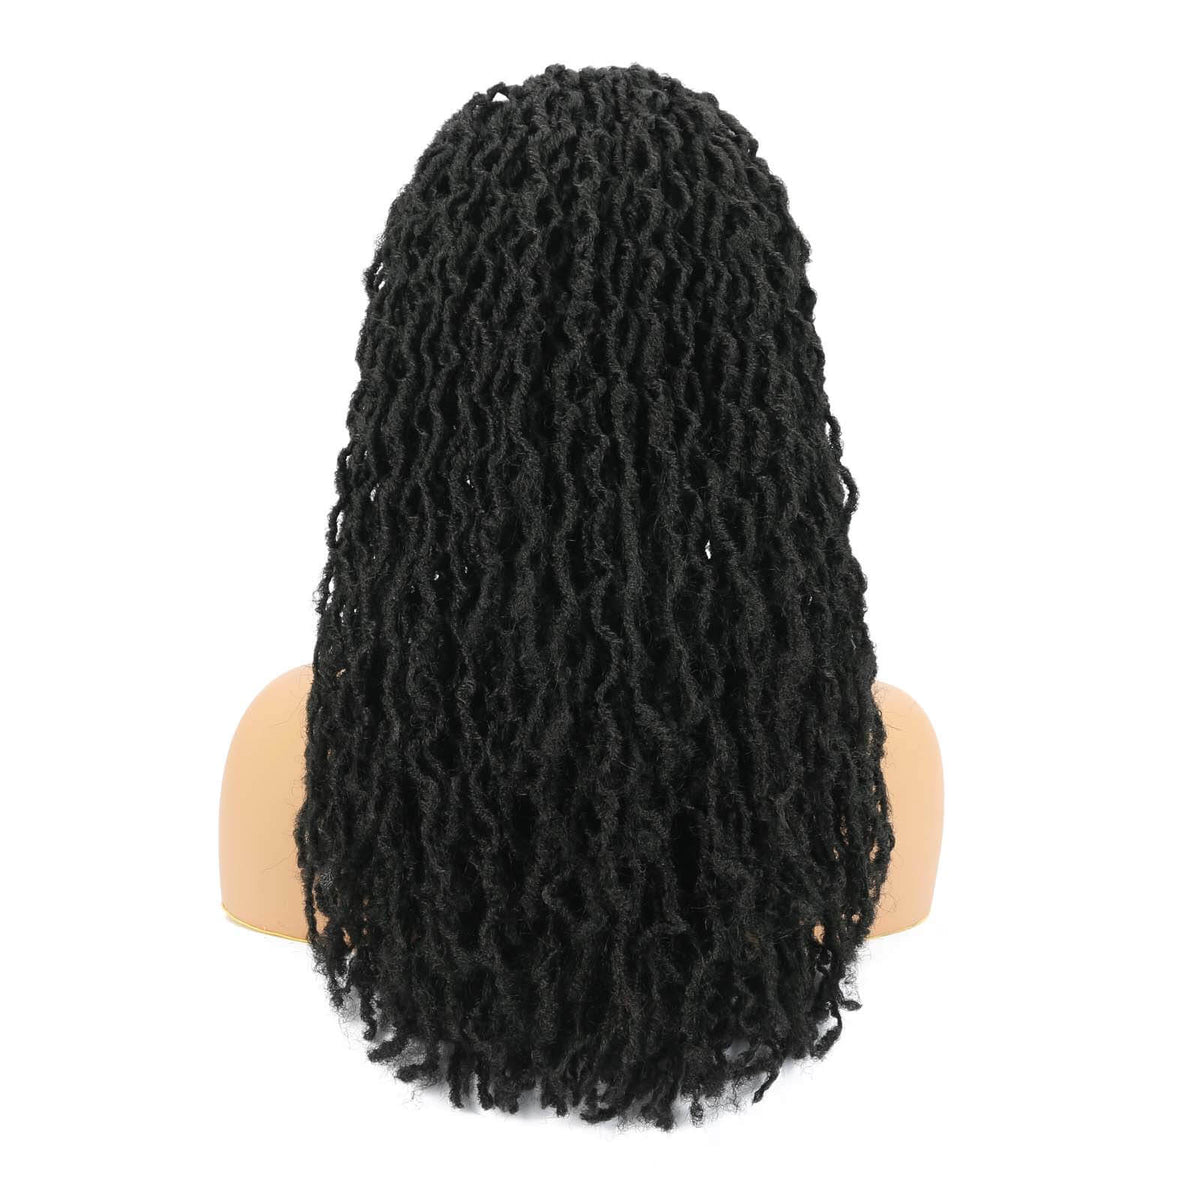 Nu Locs Headband Wigs for Black Women Black Color Braided Wigs Back Show